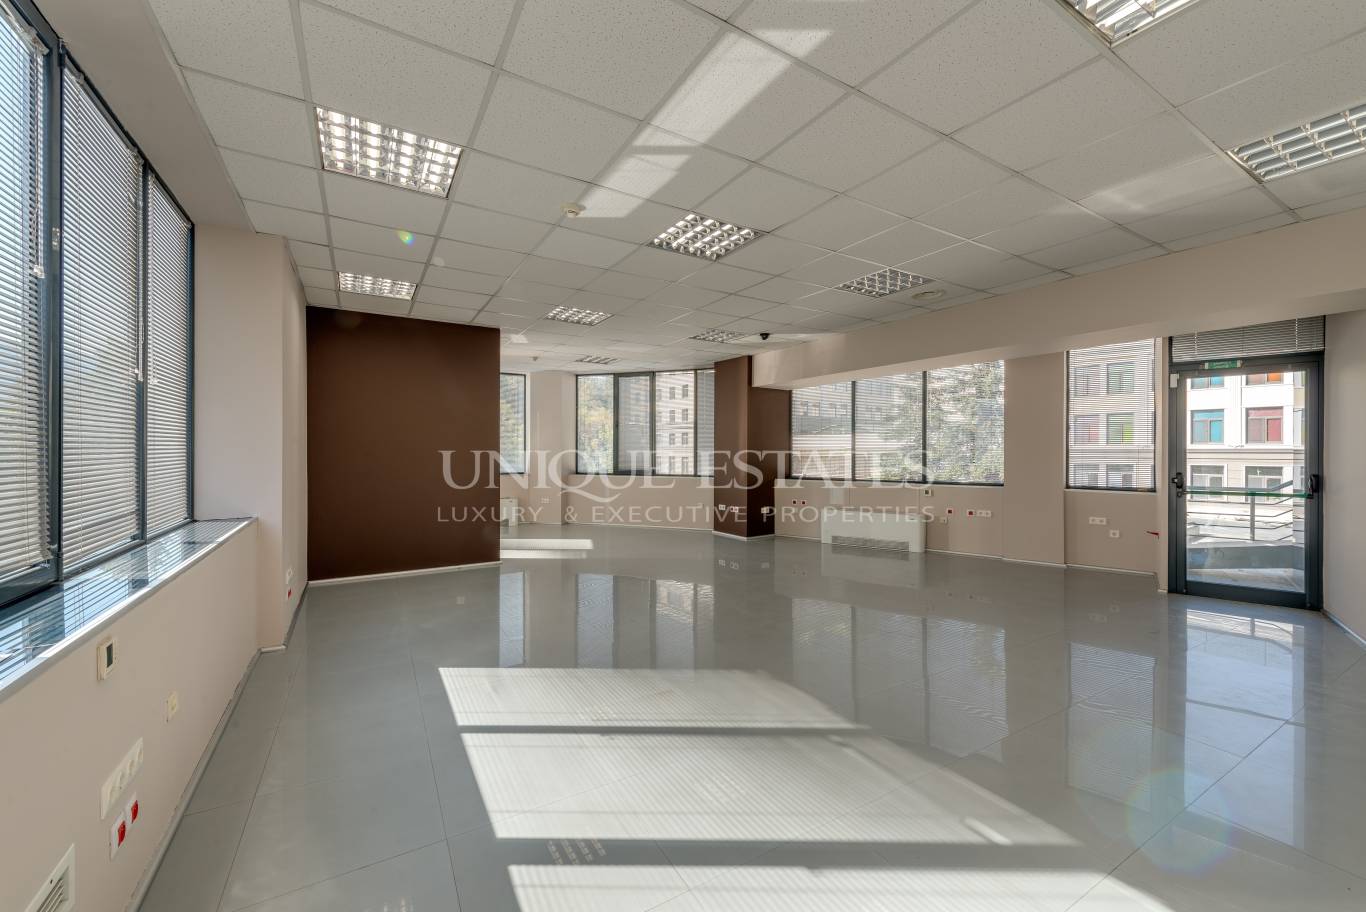 Office Building / Building for sale in Sofia, Downtown with listing ID: K10366 - image 7